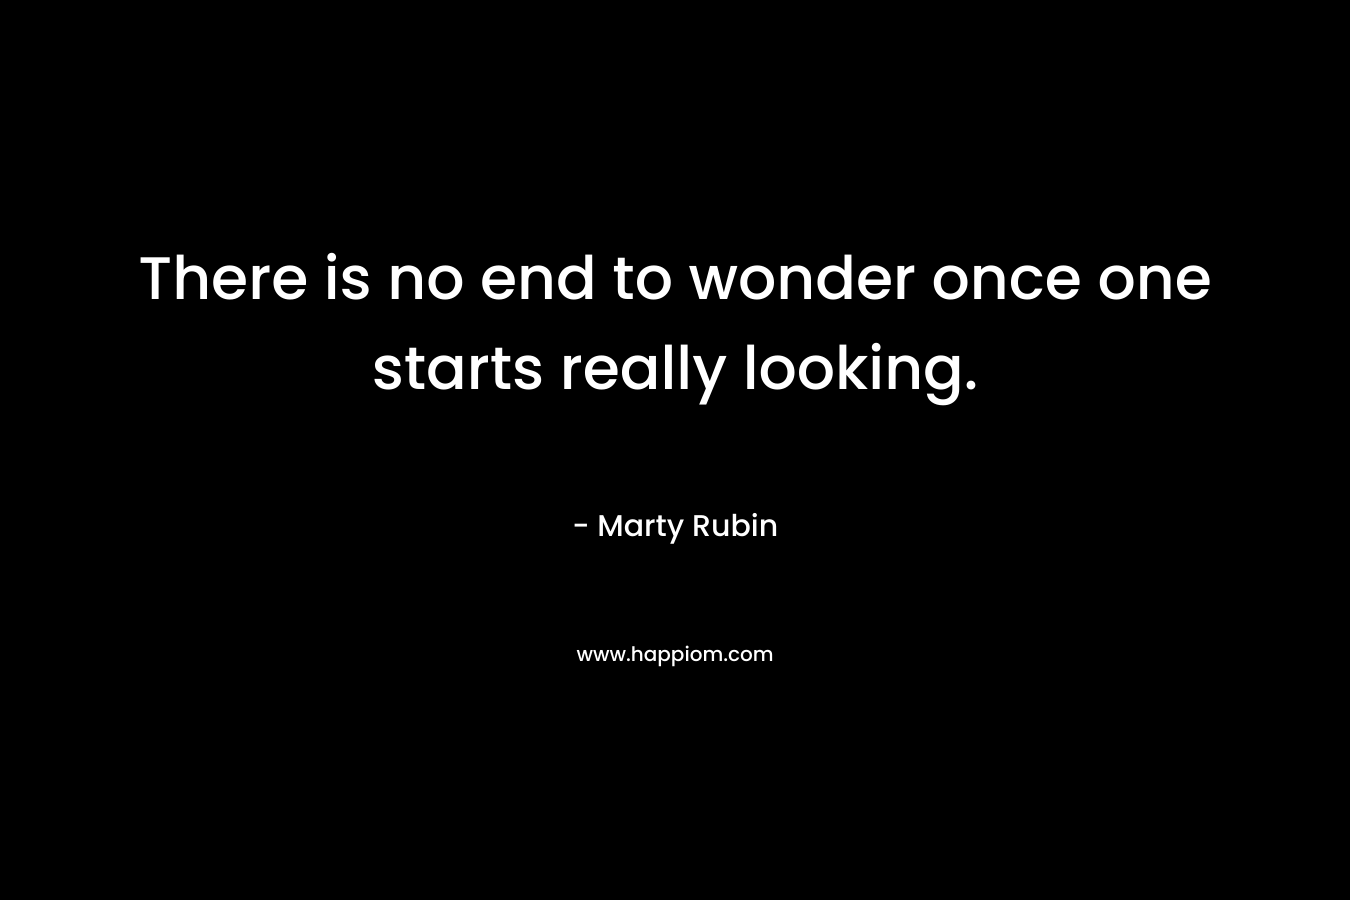 There is no end to wonder once one starts really looking. – Marty Rubin